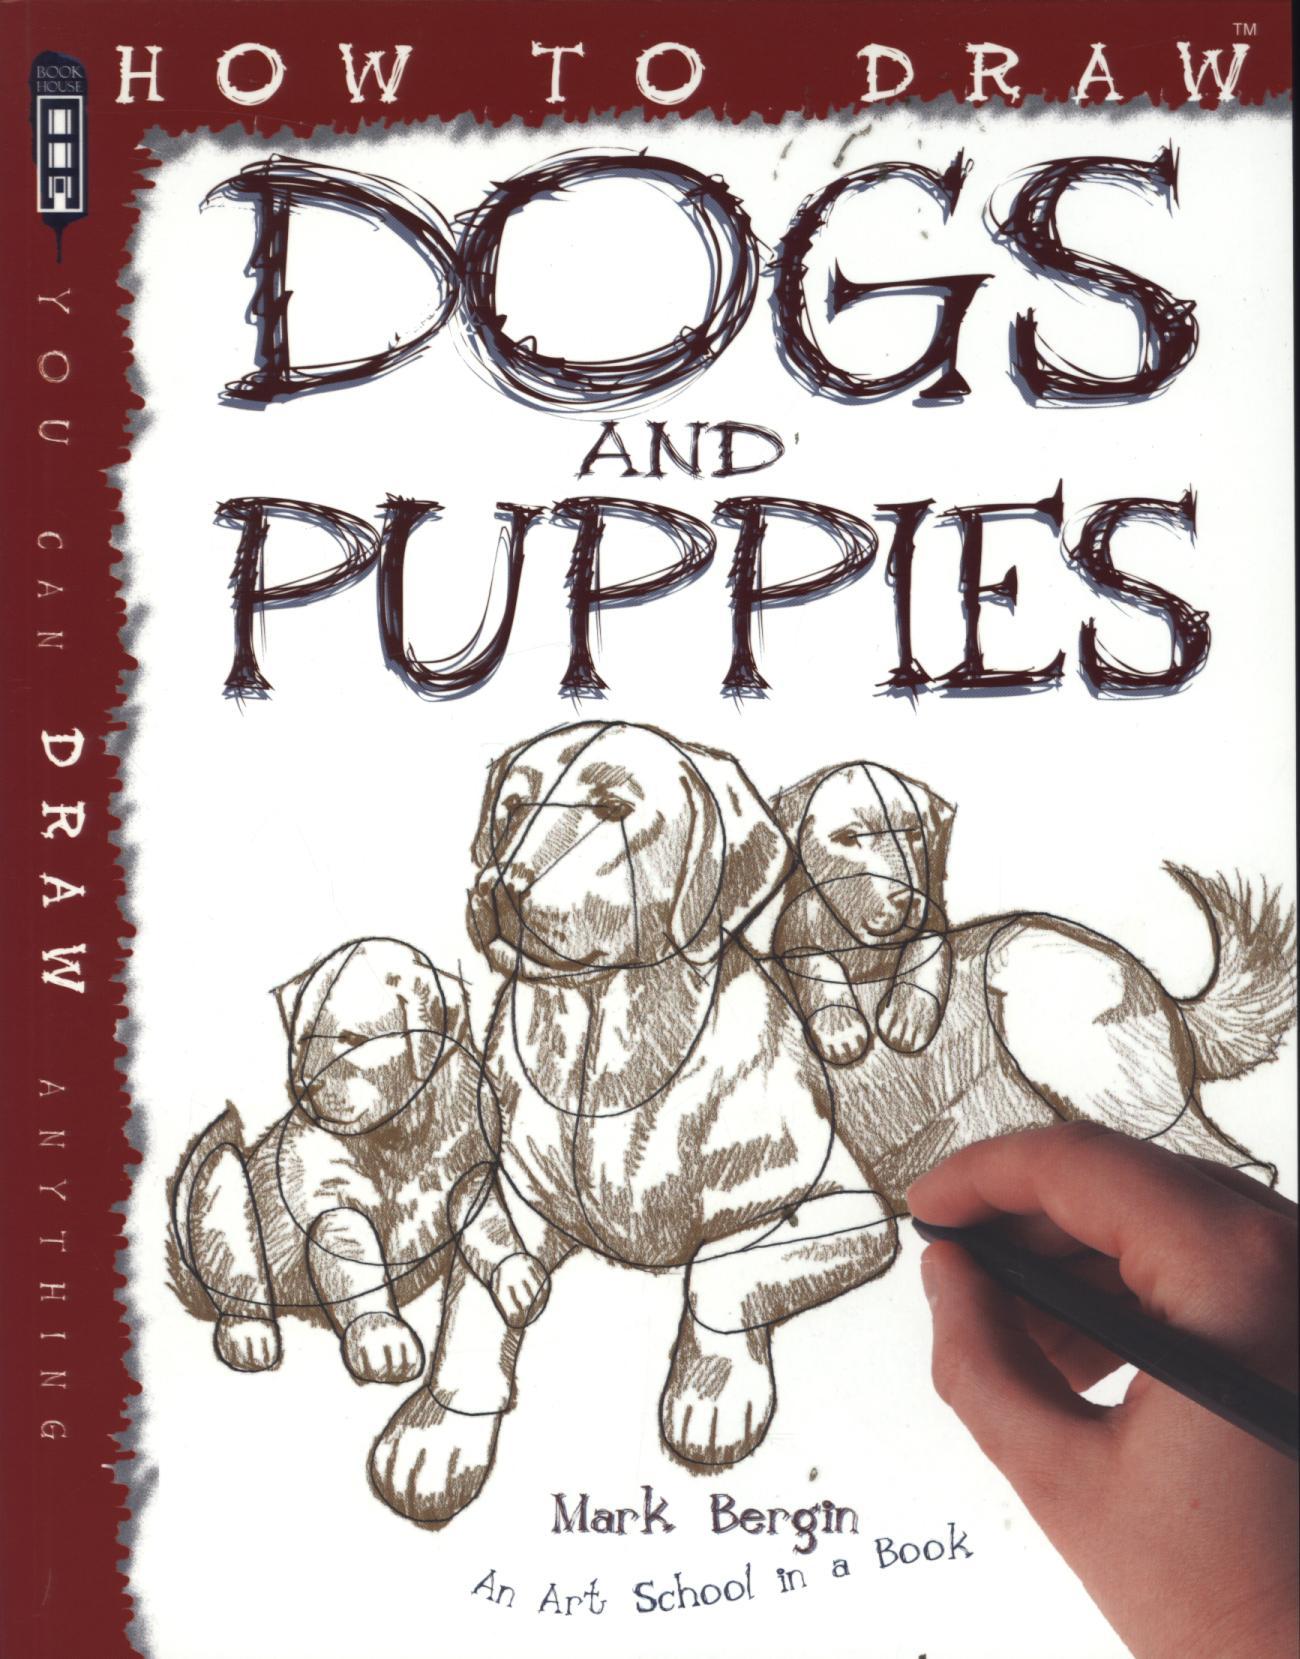 How To Draw Dogs And Puppies - Mark Bergin